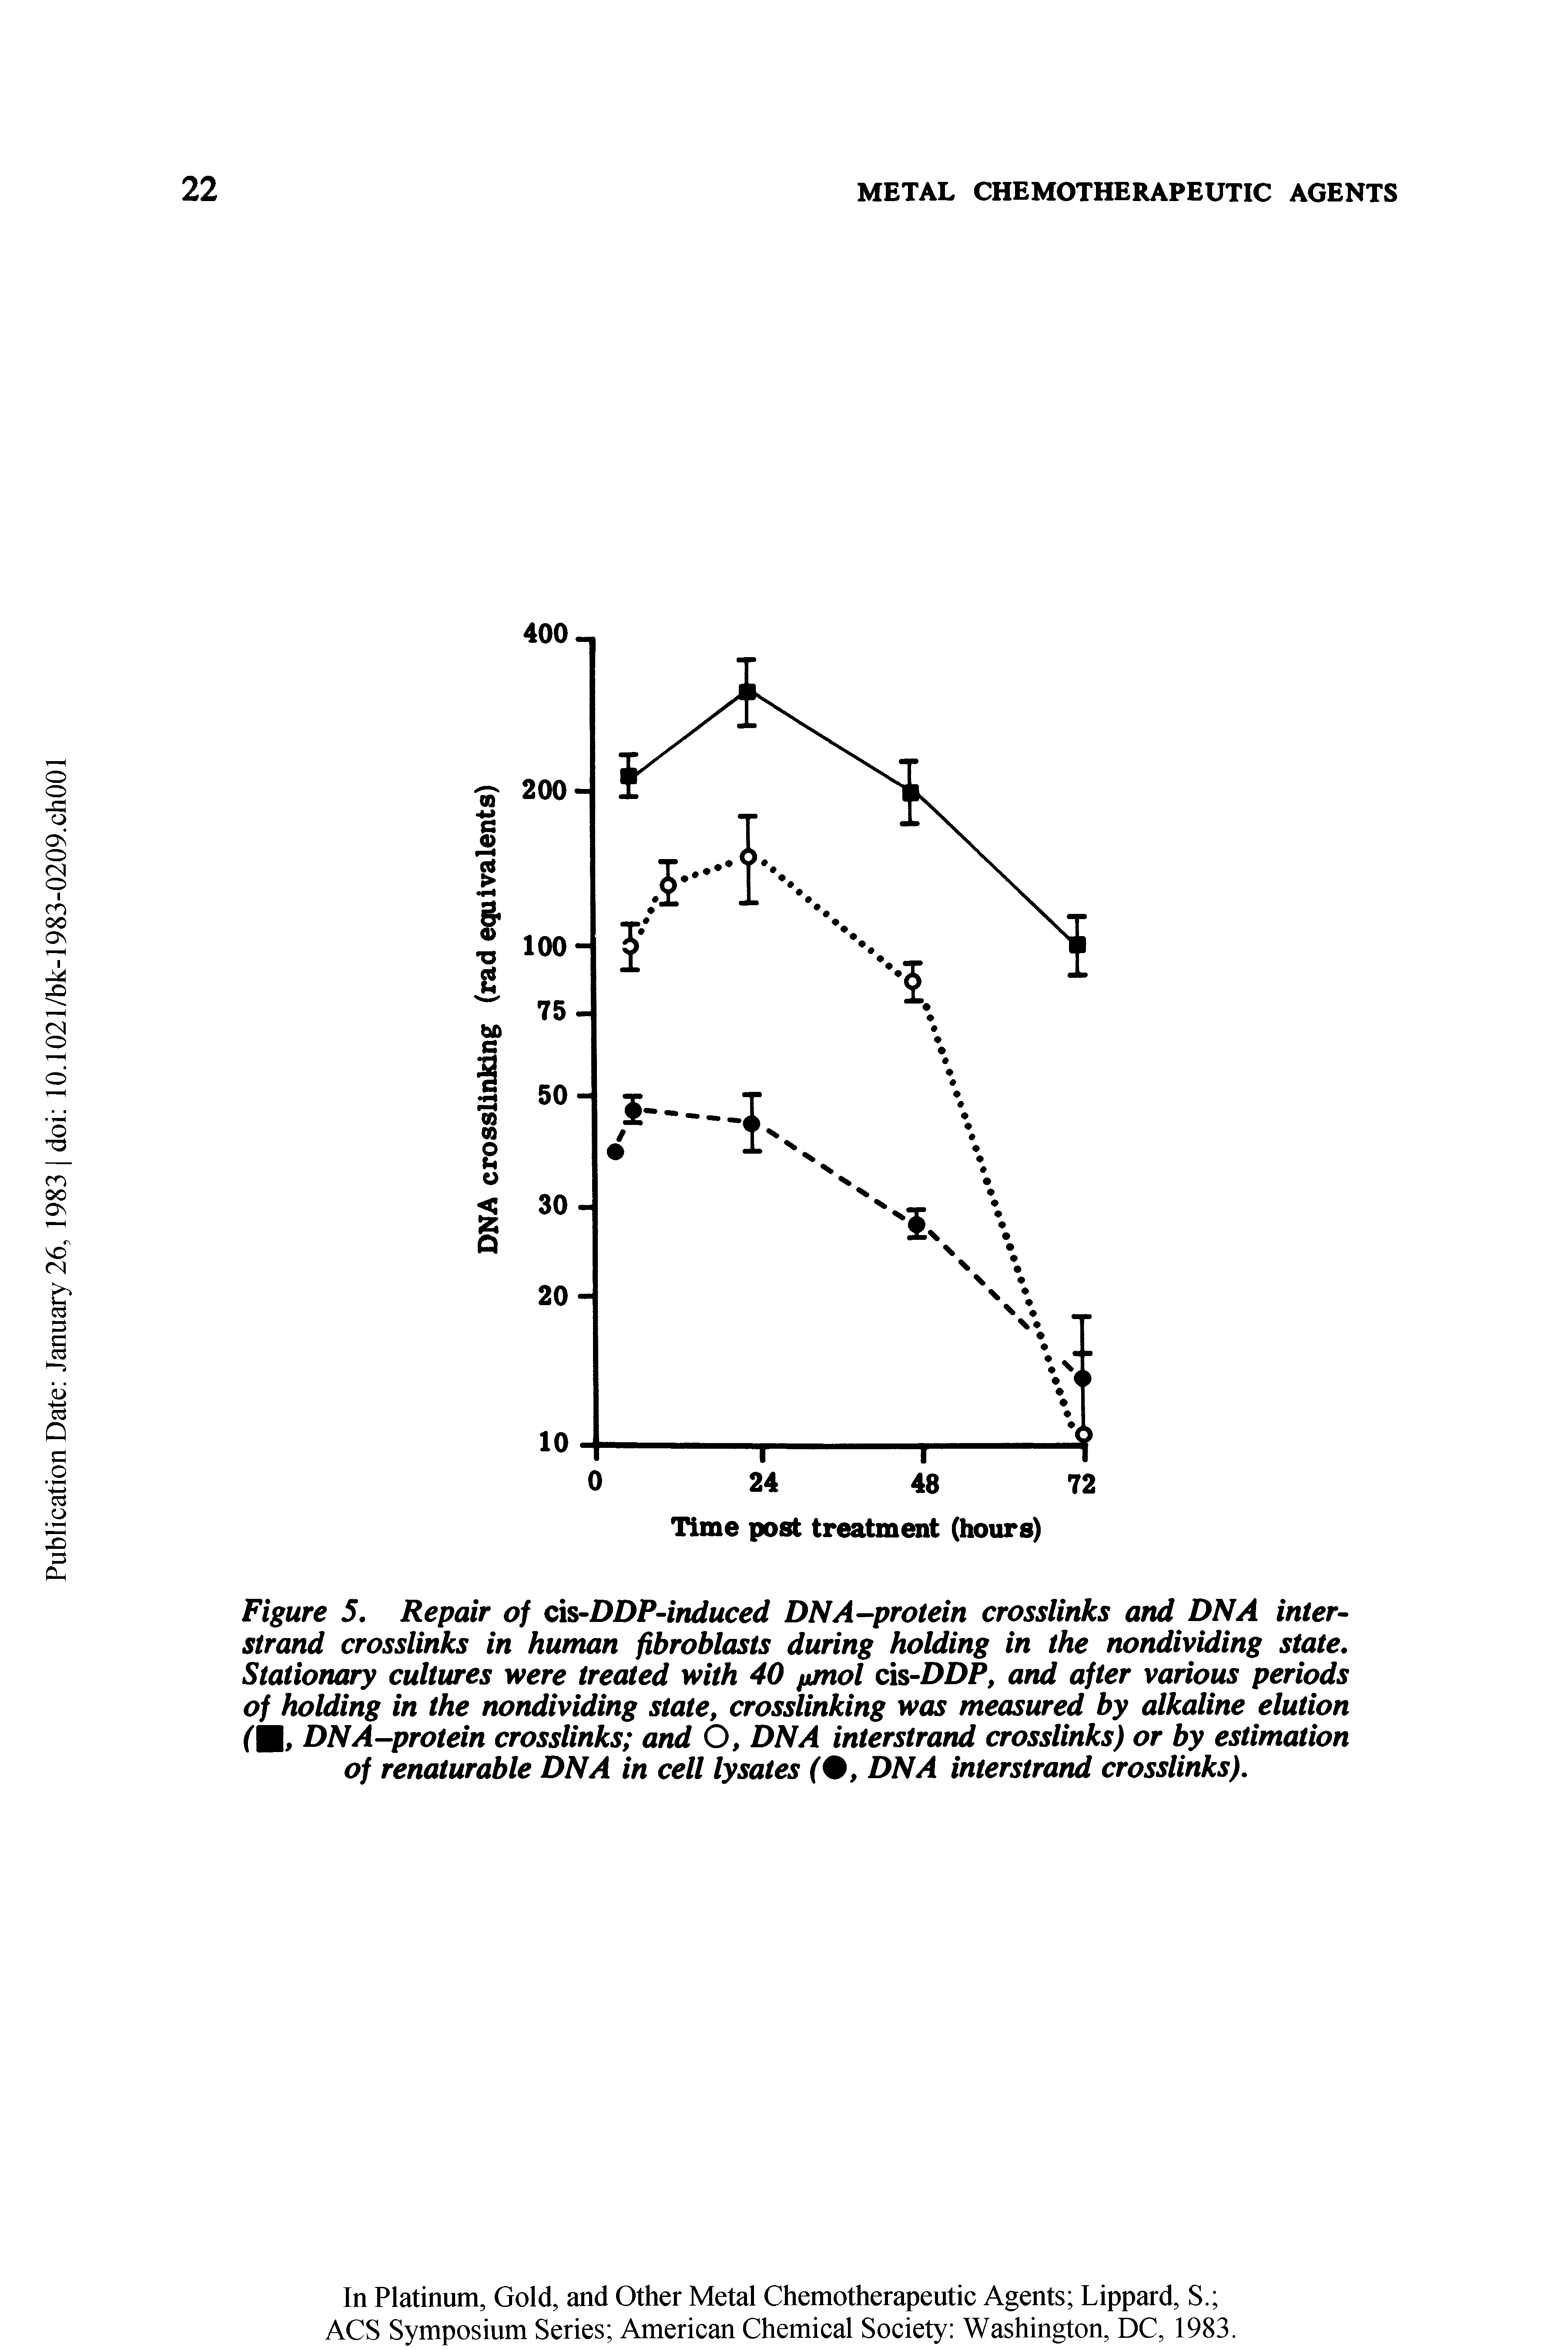 Figure 5, Repair of ci DDP-iruiuced DNA-protein crosslinks and DNA inter-strand crosslinks in human fibroblasts during holding in the nondividing state. Stationary cultures were treated with 40 fjjnol cvs-DDP, and after various periods of holding in the nondividing state, crosslinking was measured by alkaline elution (U DNA-protein crosslinks and O, DNA interstrand crosslinks) or by estimation of renaturable DNA in cell lysates (%, DNA interstrand crosslinks).